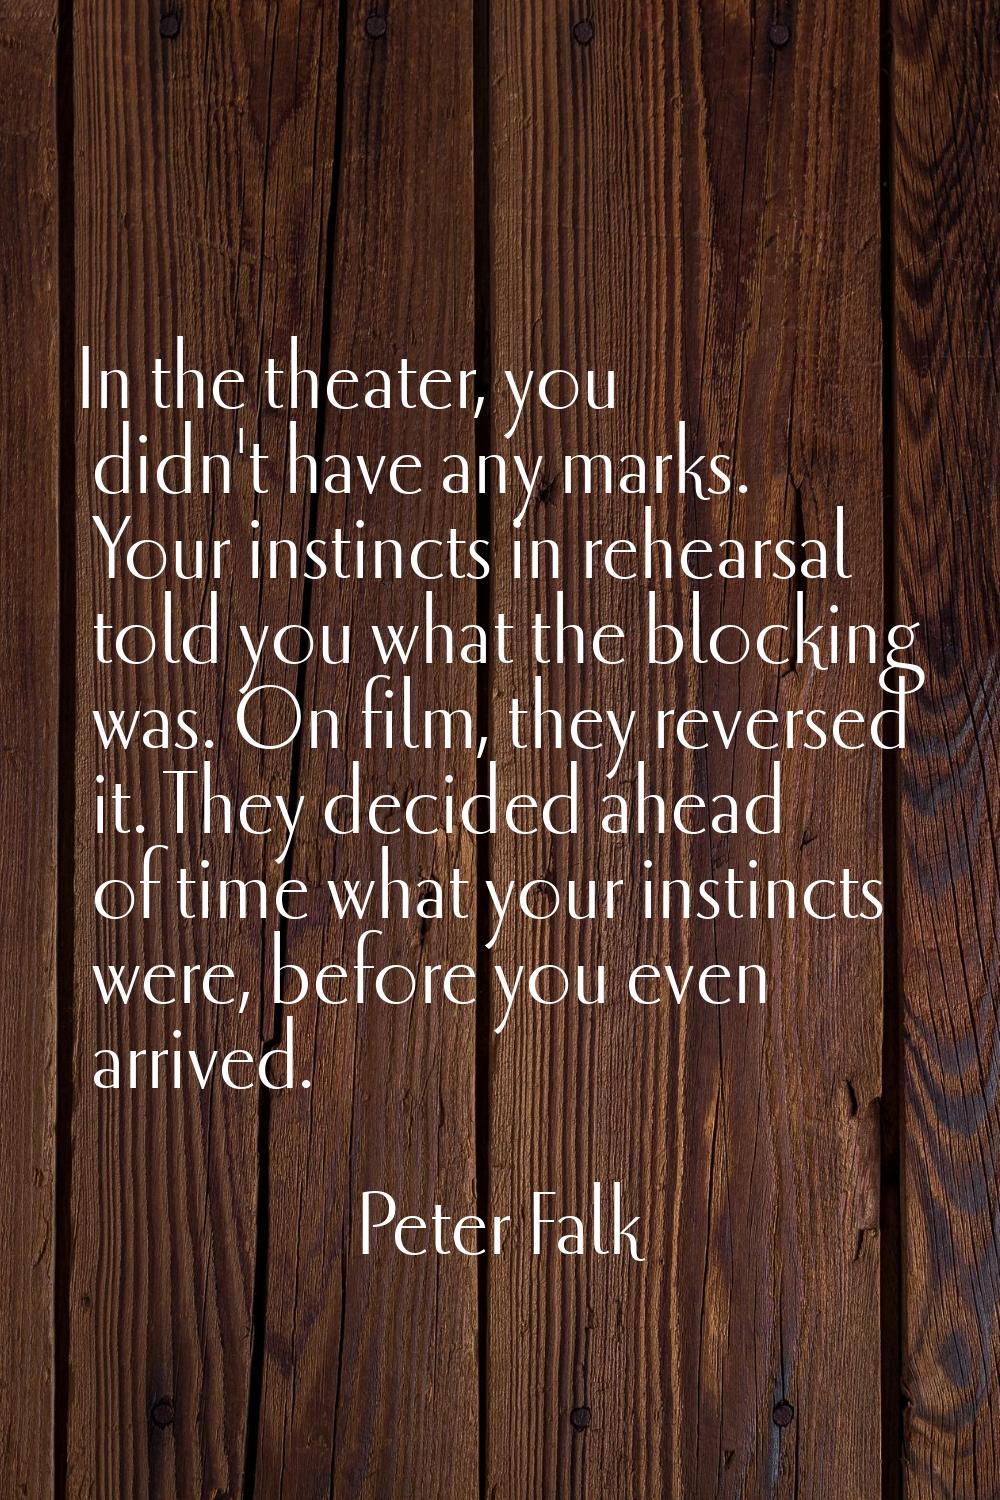 In the theater, you didn't have any marks. Your instincts in rehearsal told you what the blocking w